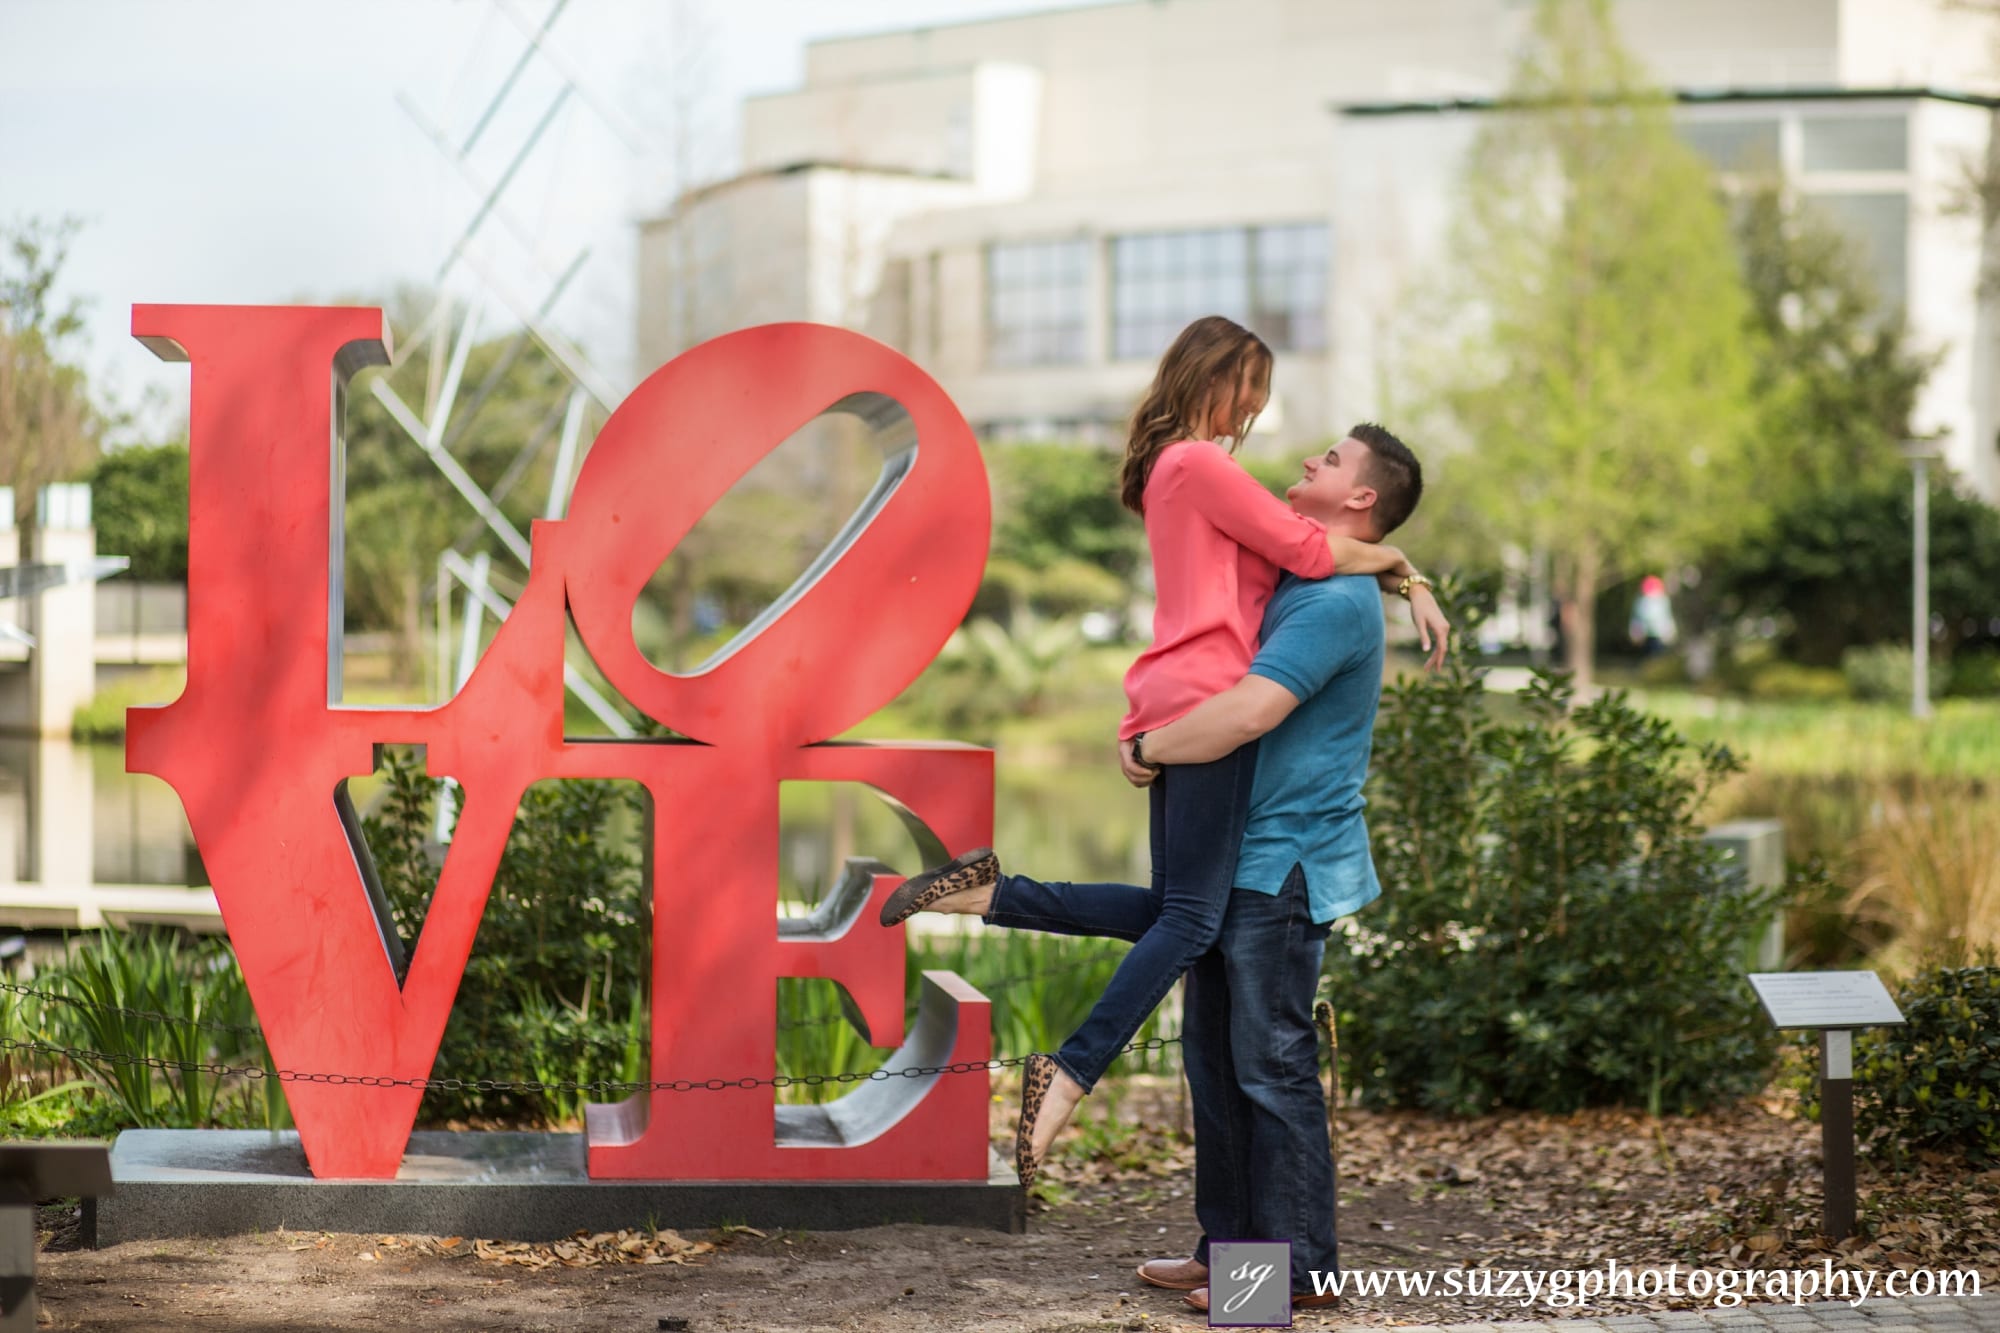 engagement photography-new orleans engagement photography-louisiana wedding photographer-wedding photography-suzy-g-photography-weddings_0013